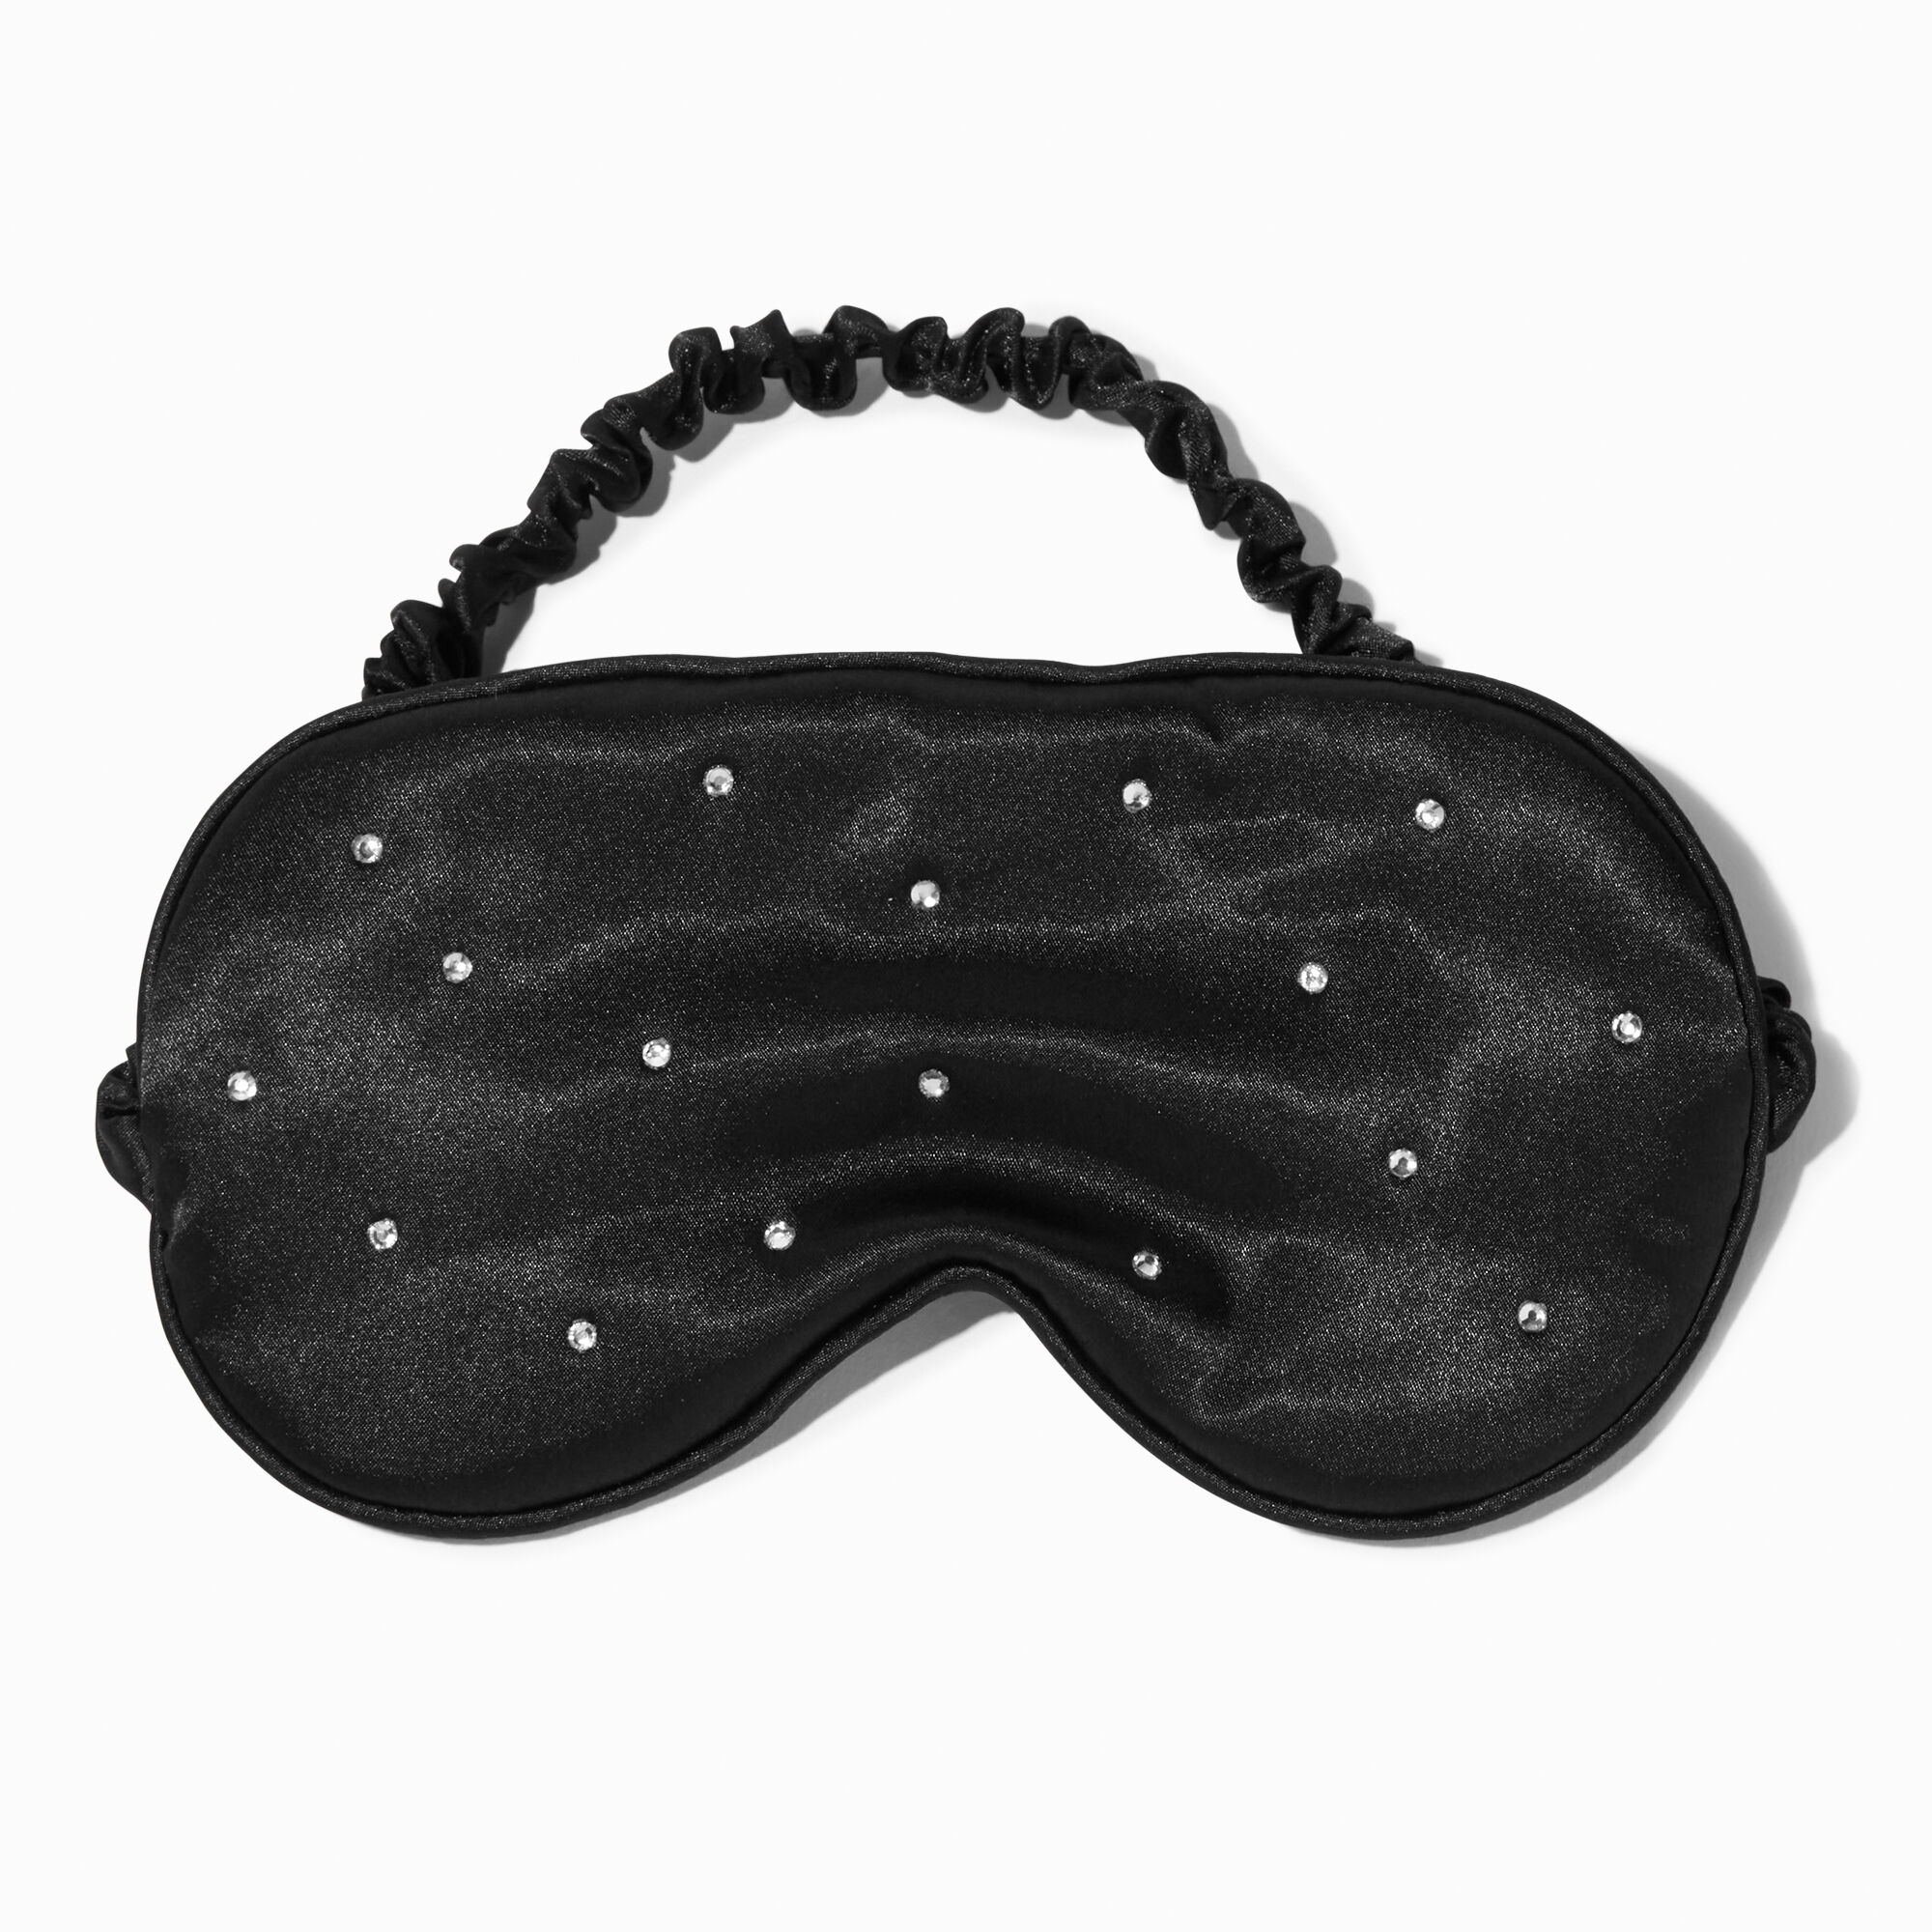 View Claires Bling Satin Sleeping Mask Black information